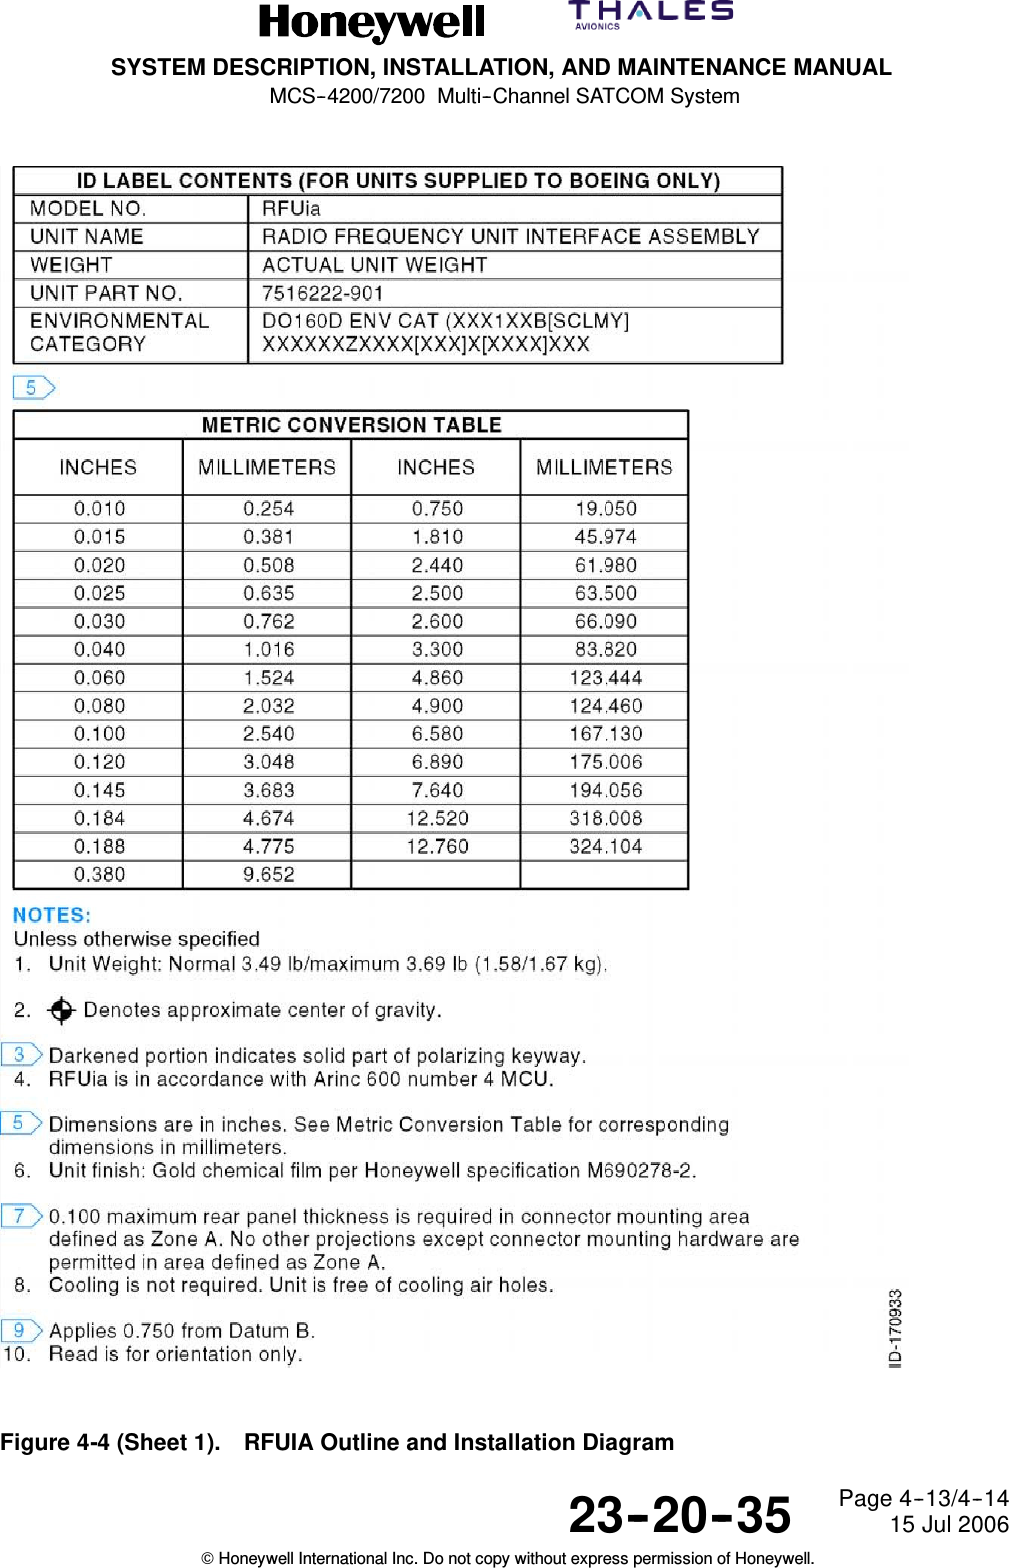 SYSTEM DESCRIPTION, INSTALLATION, AND MAINTENANCE MANUALMCS--4200/7200 Multi--Channel SATCOM System23--20--35 15 Jul 2006Honeywell International Inc. Do not copy without express permission of Honeywell.Page 4--13/4--14Figure 4-4 (Sheet 1). RFUIA Outline and Installation Diagram